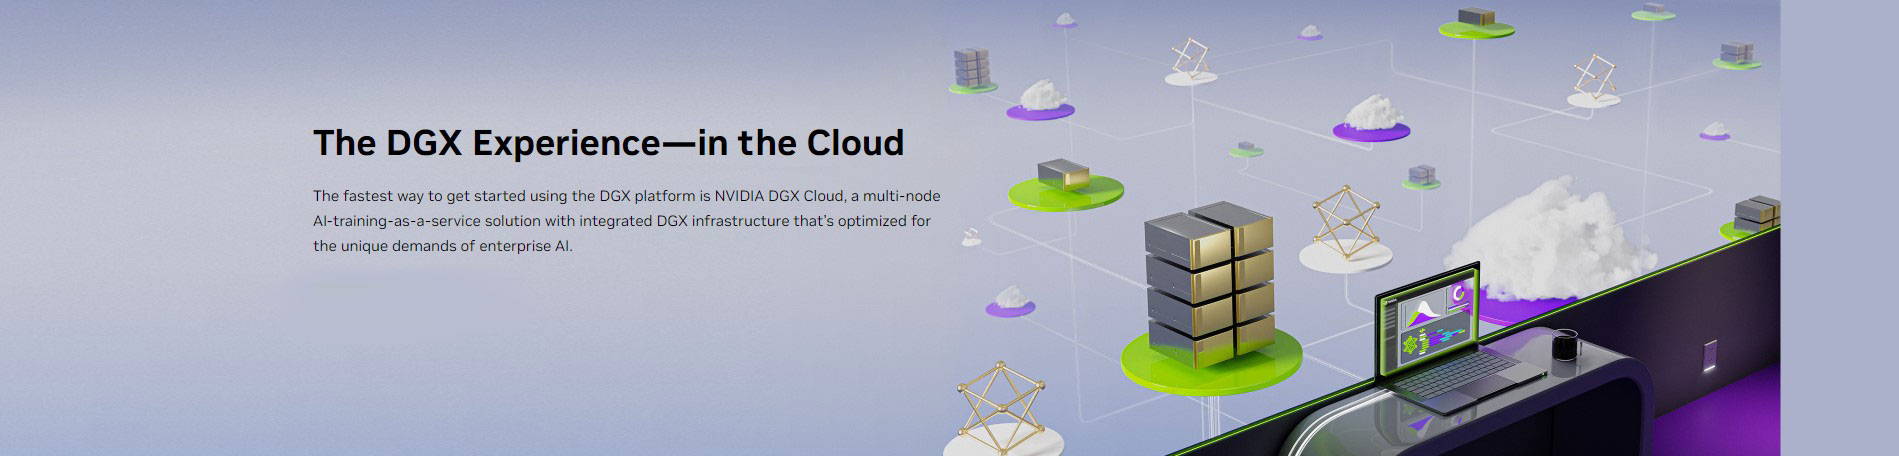 The DGX Experience in the Cloud